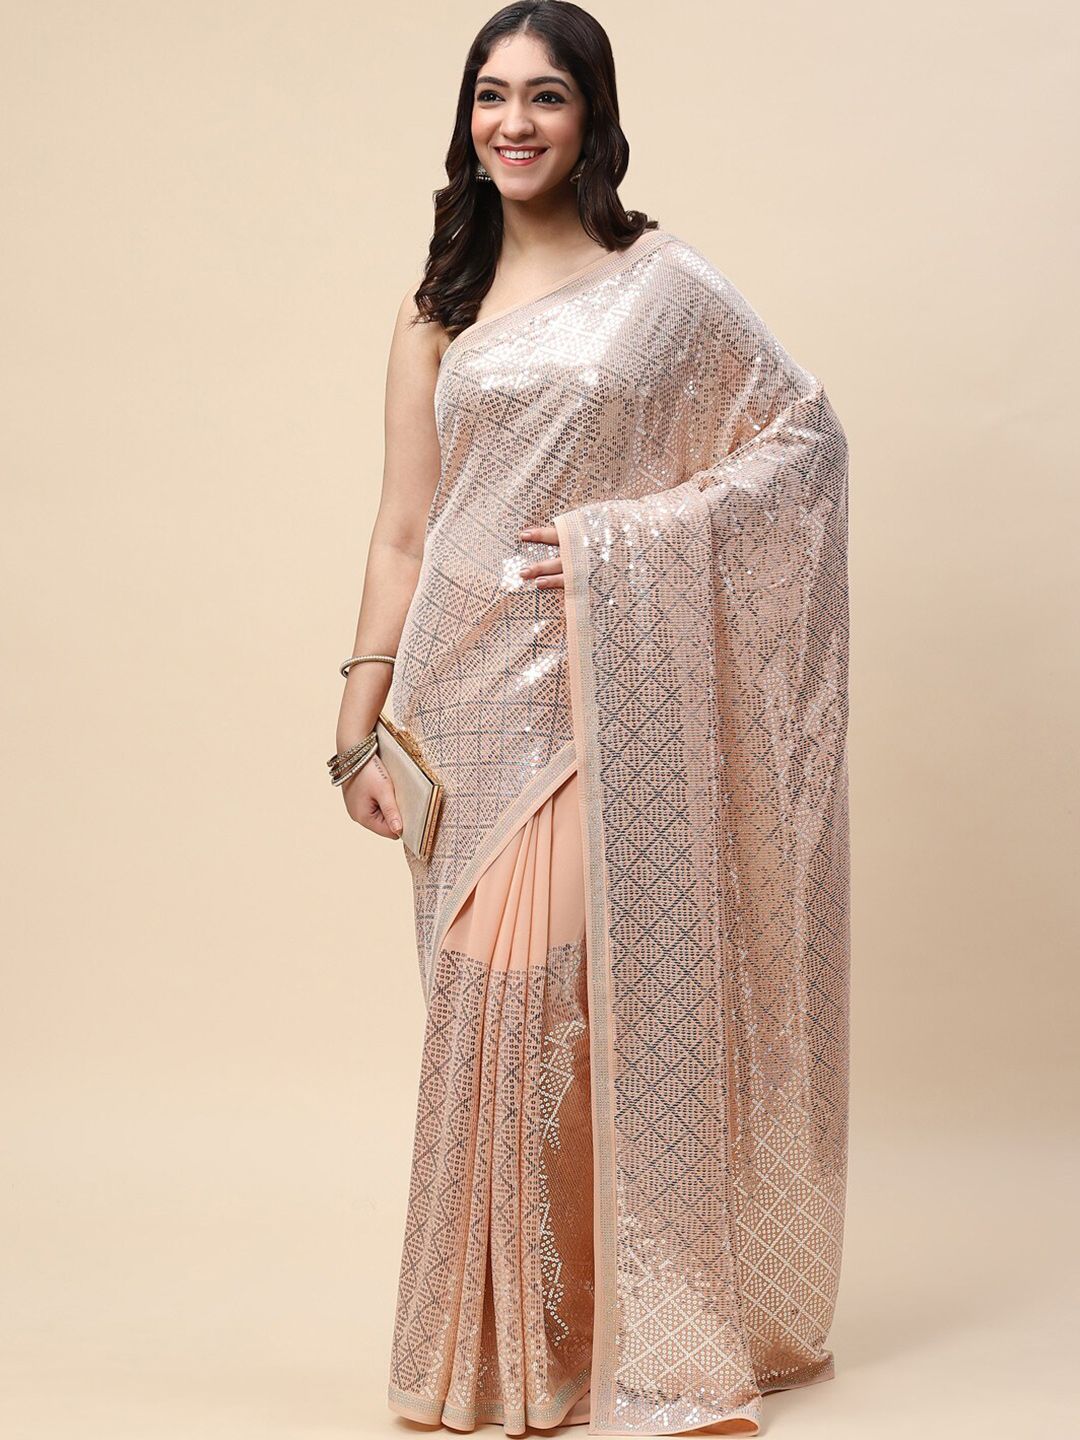 Meena Bazaar Peach-Coloured & Silver-Toned Embellished Sequinned Saree Price in India